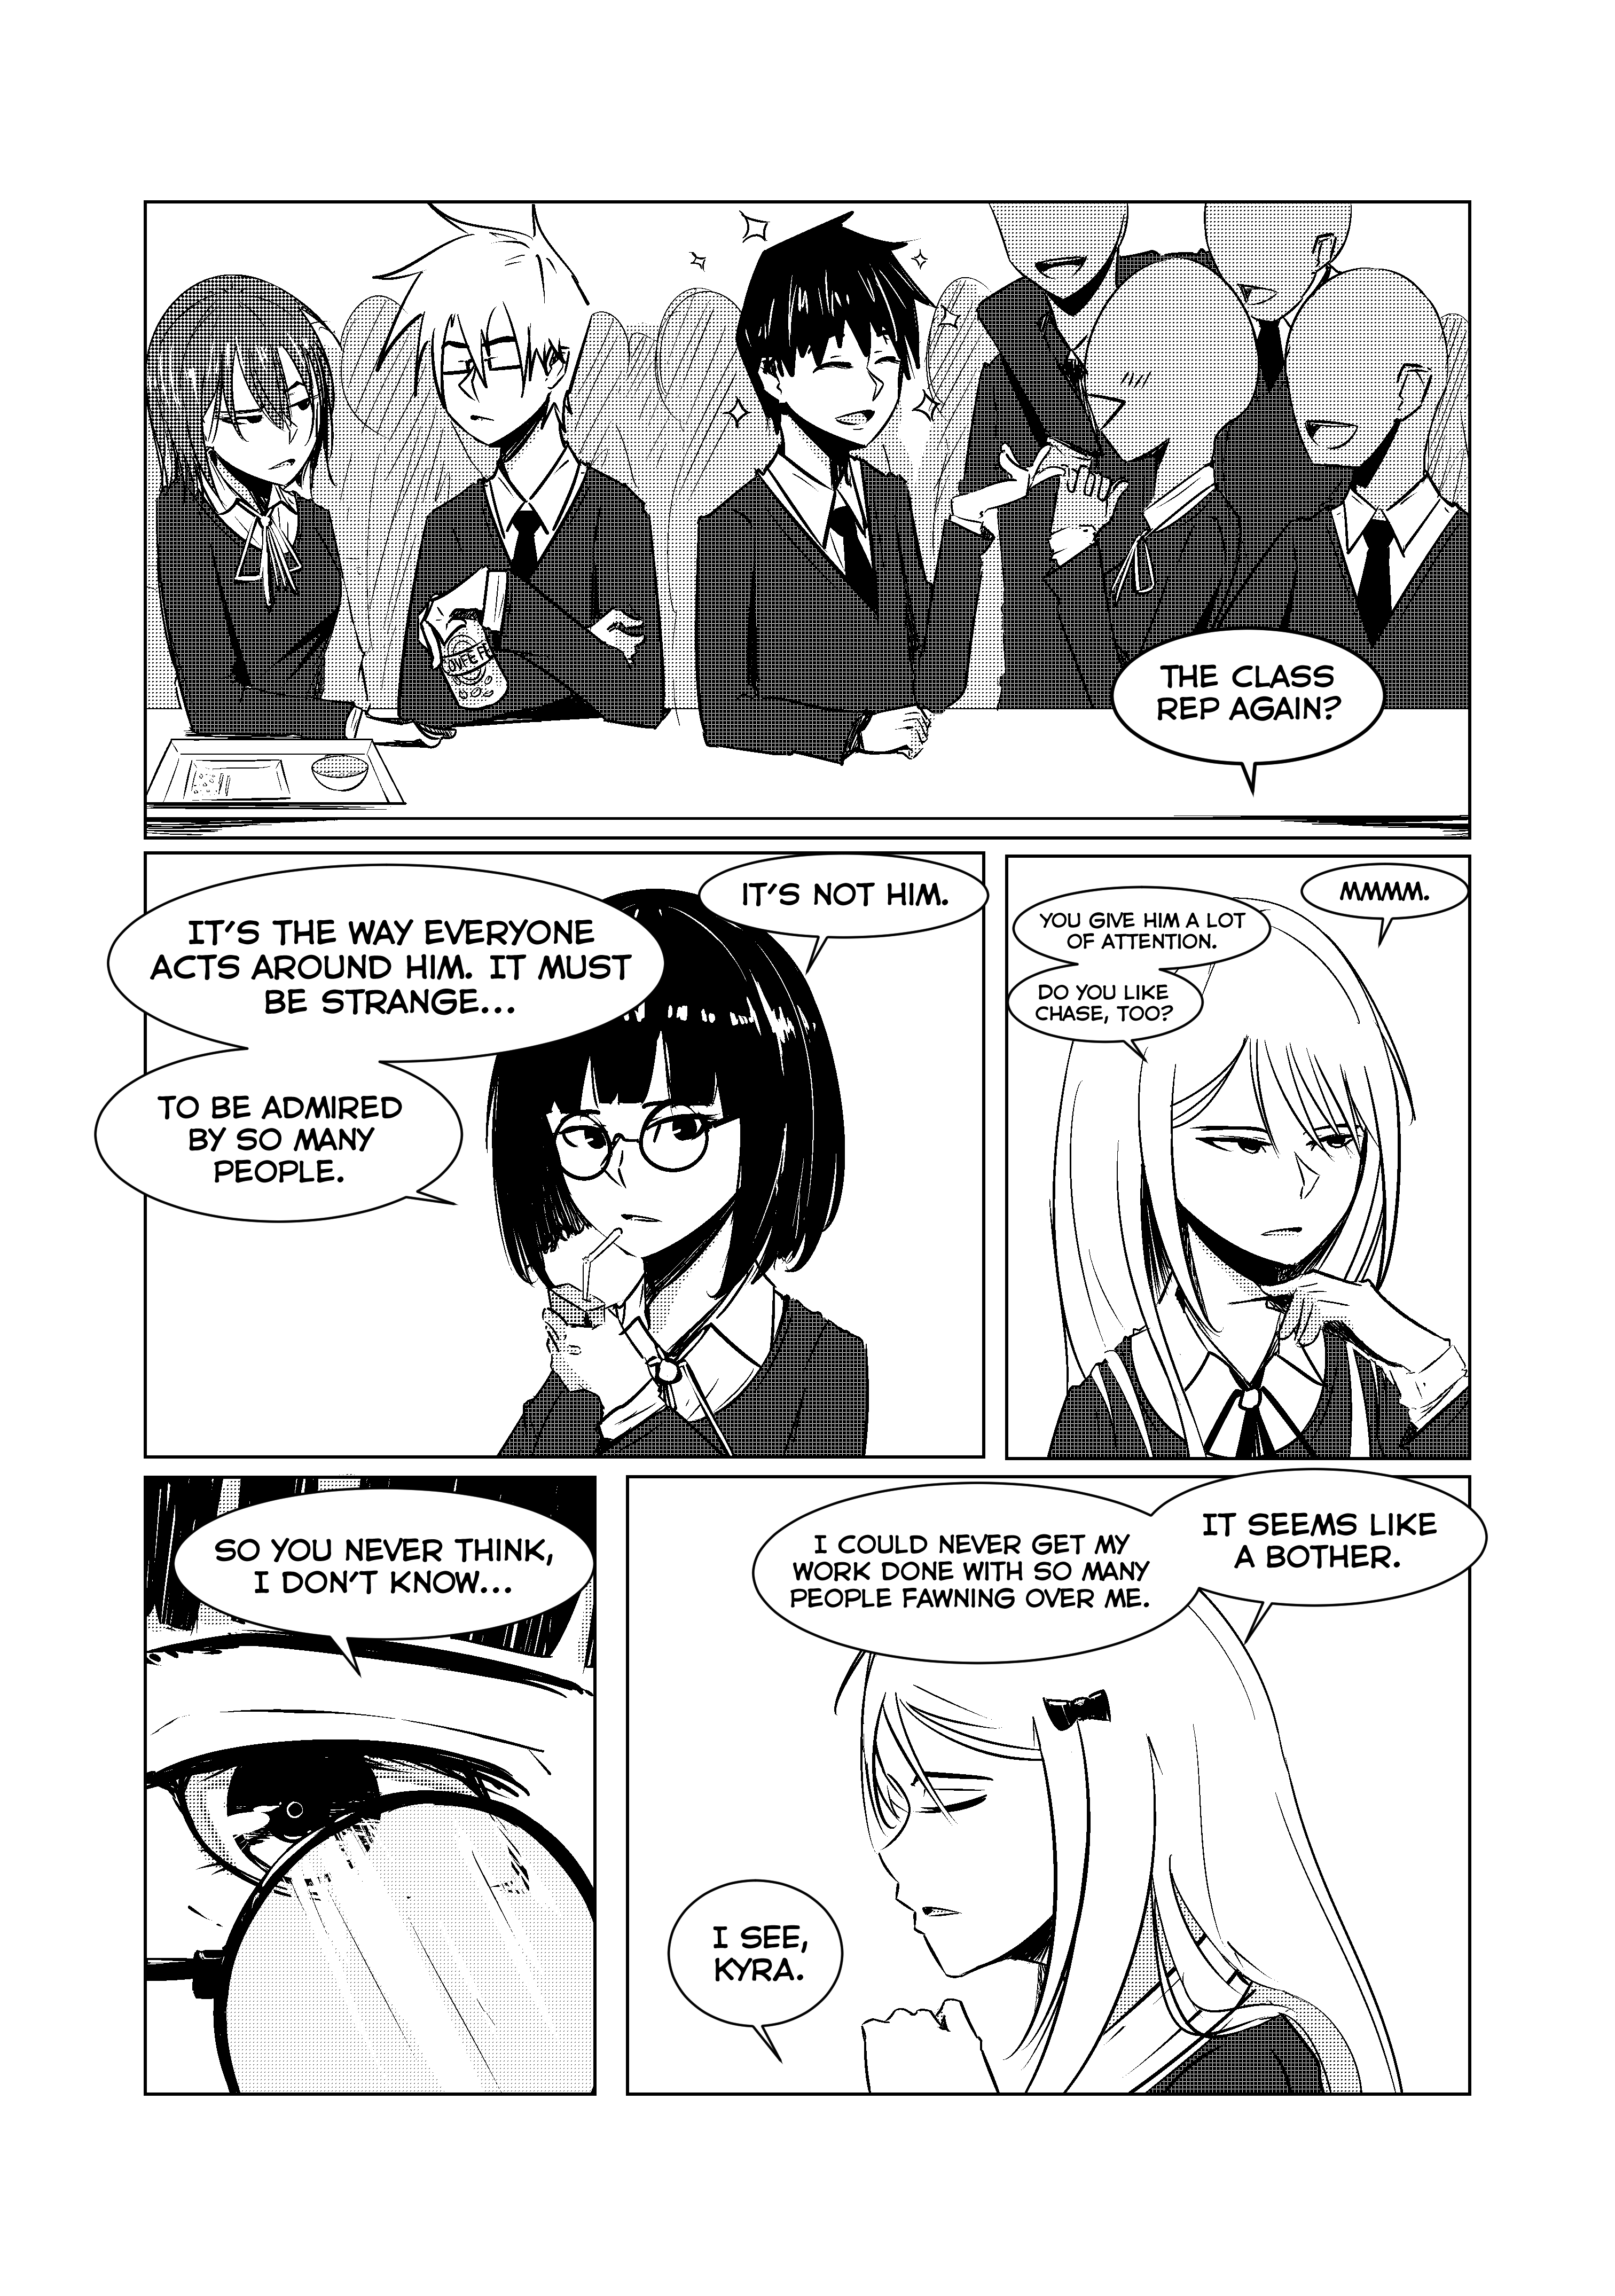 Opposites In Disguise - 1 page 25